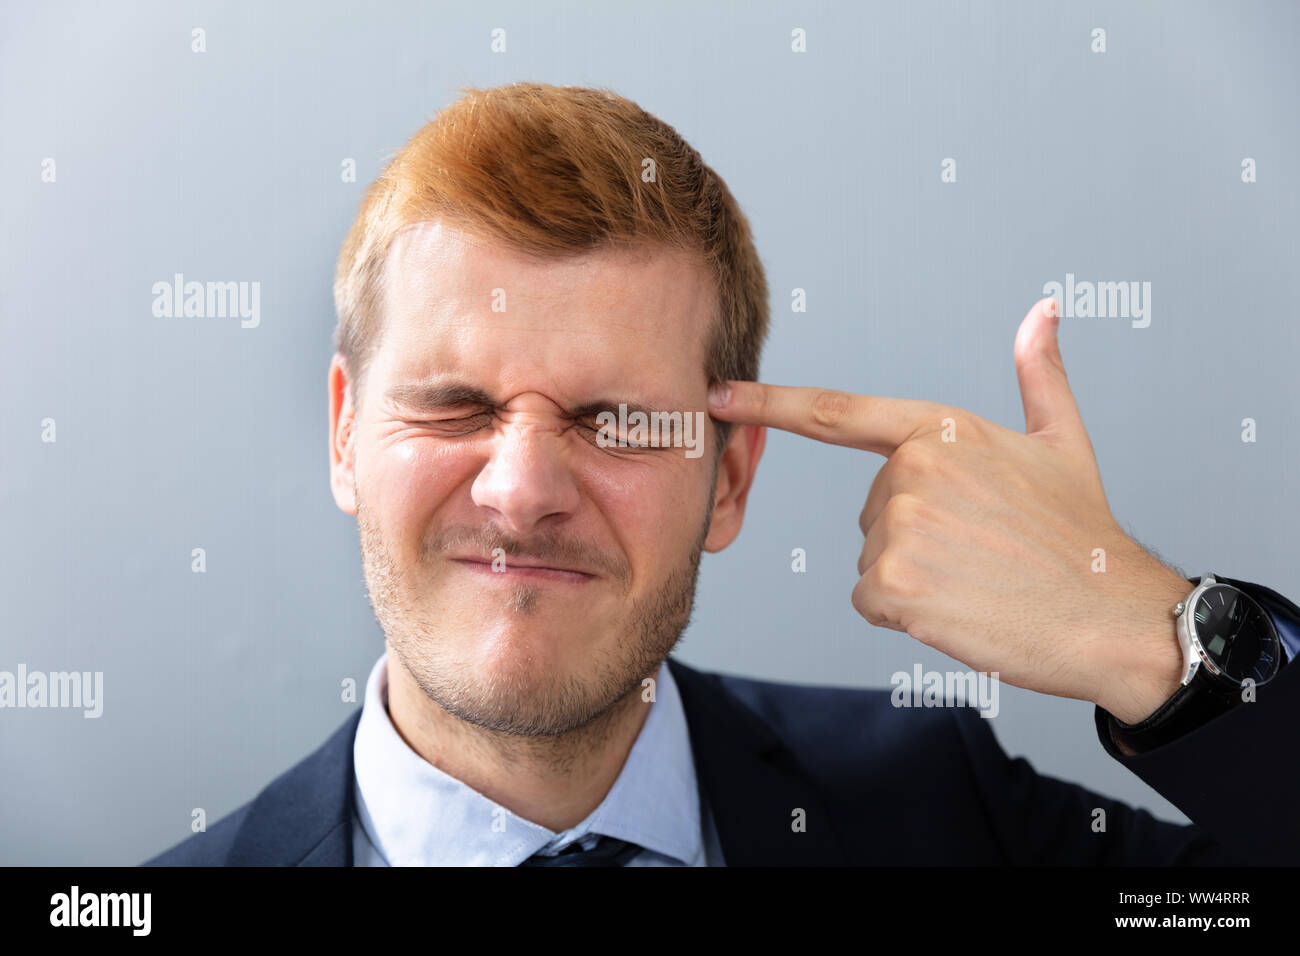 Man Making Shooting Gesture Using His Hand In Office Stock Photo